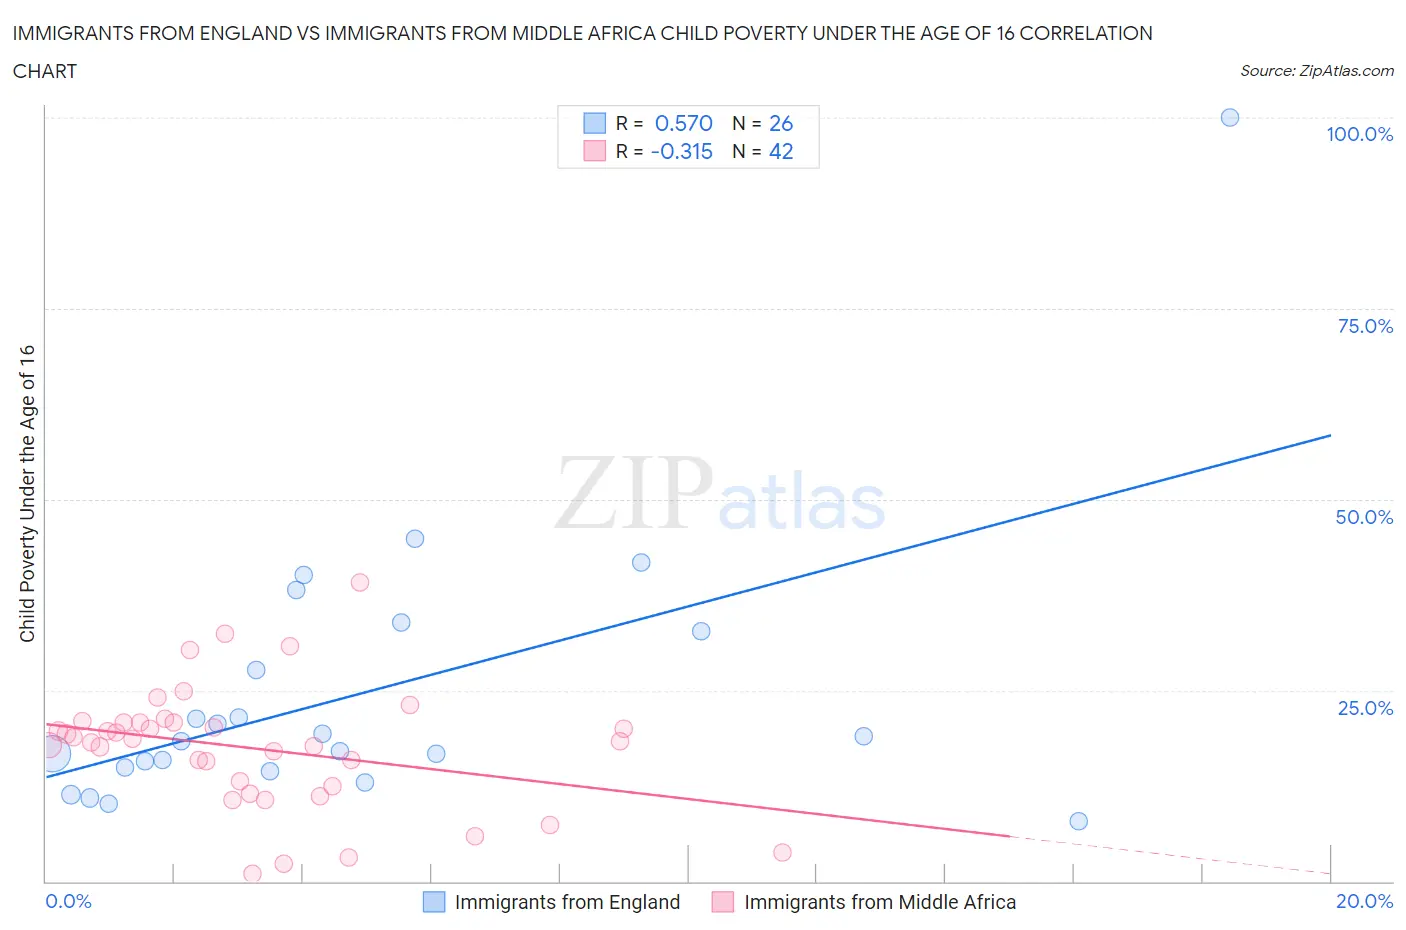 Immigrants from England vs Immigrants from Middle Africa Child Poverty Under the Age of 16